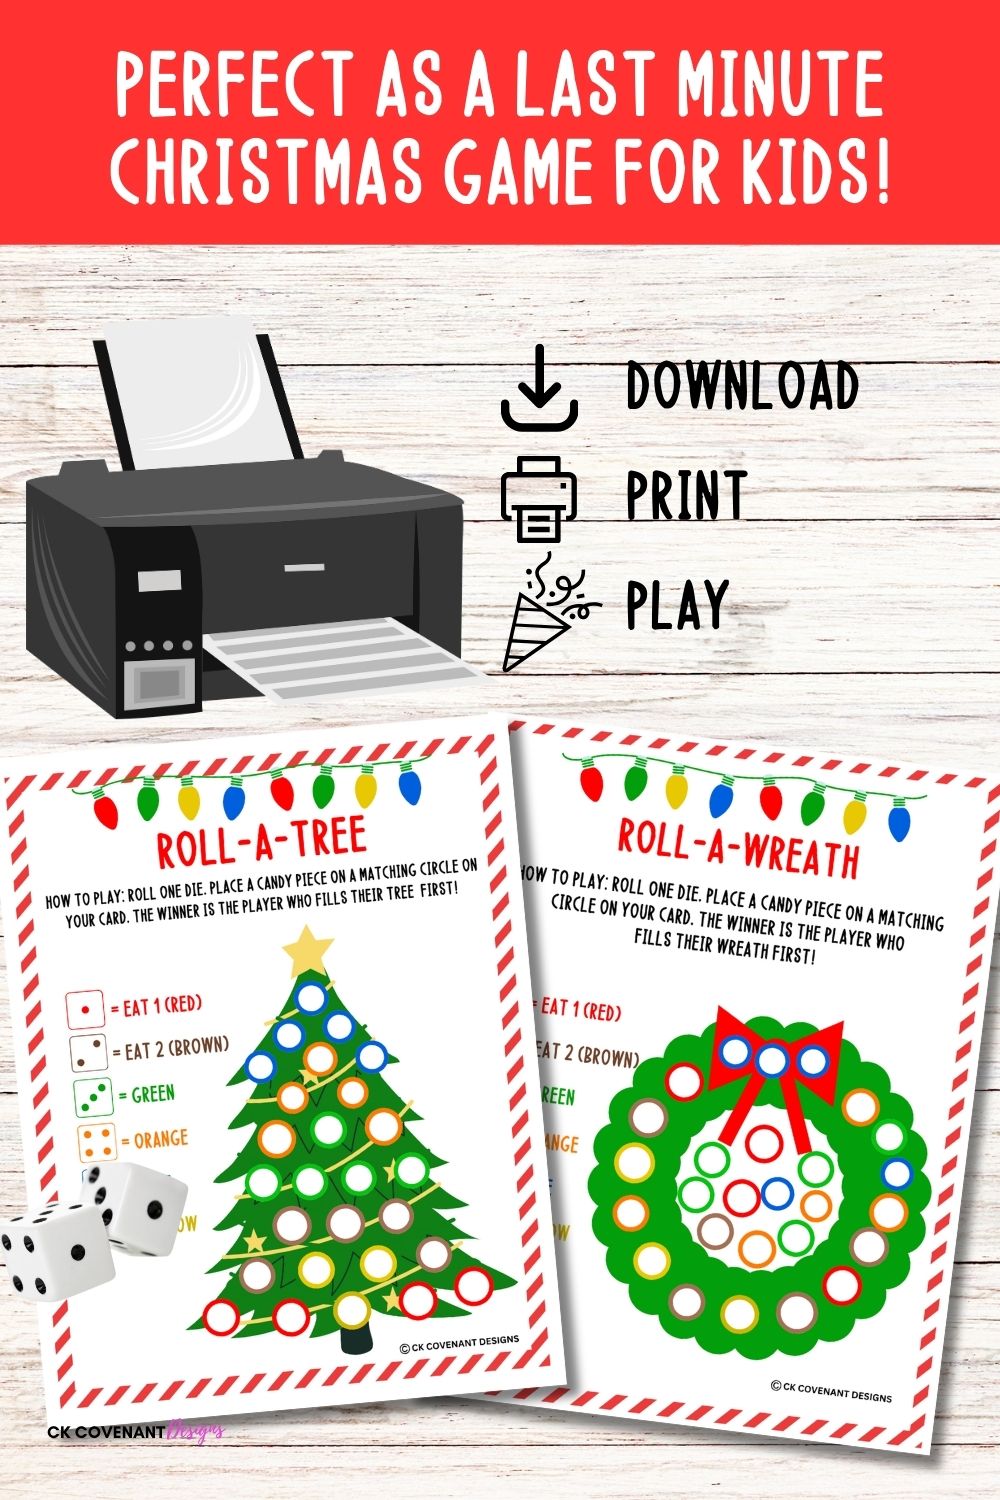 Roll-A-Tree Dice Game